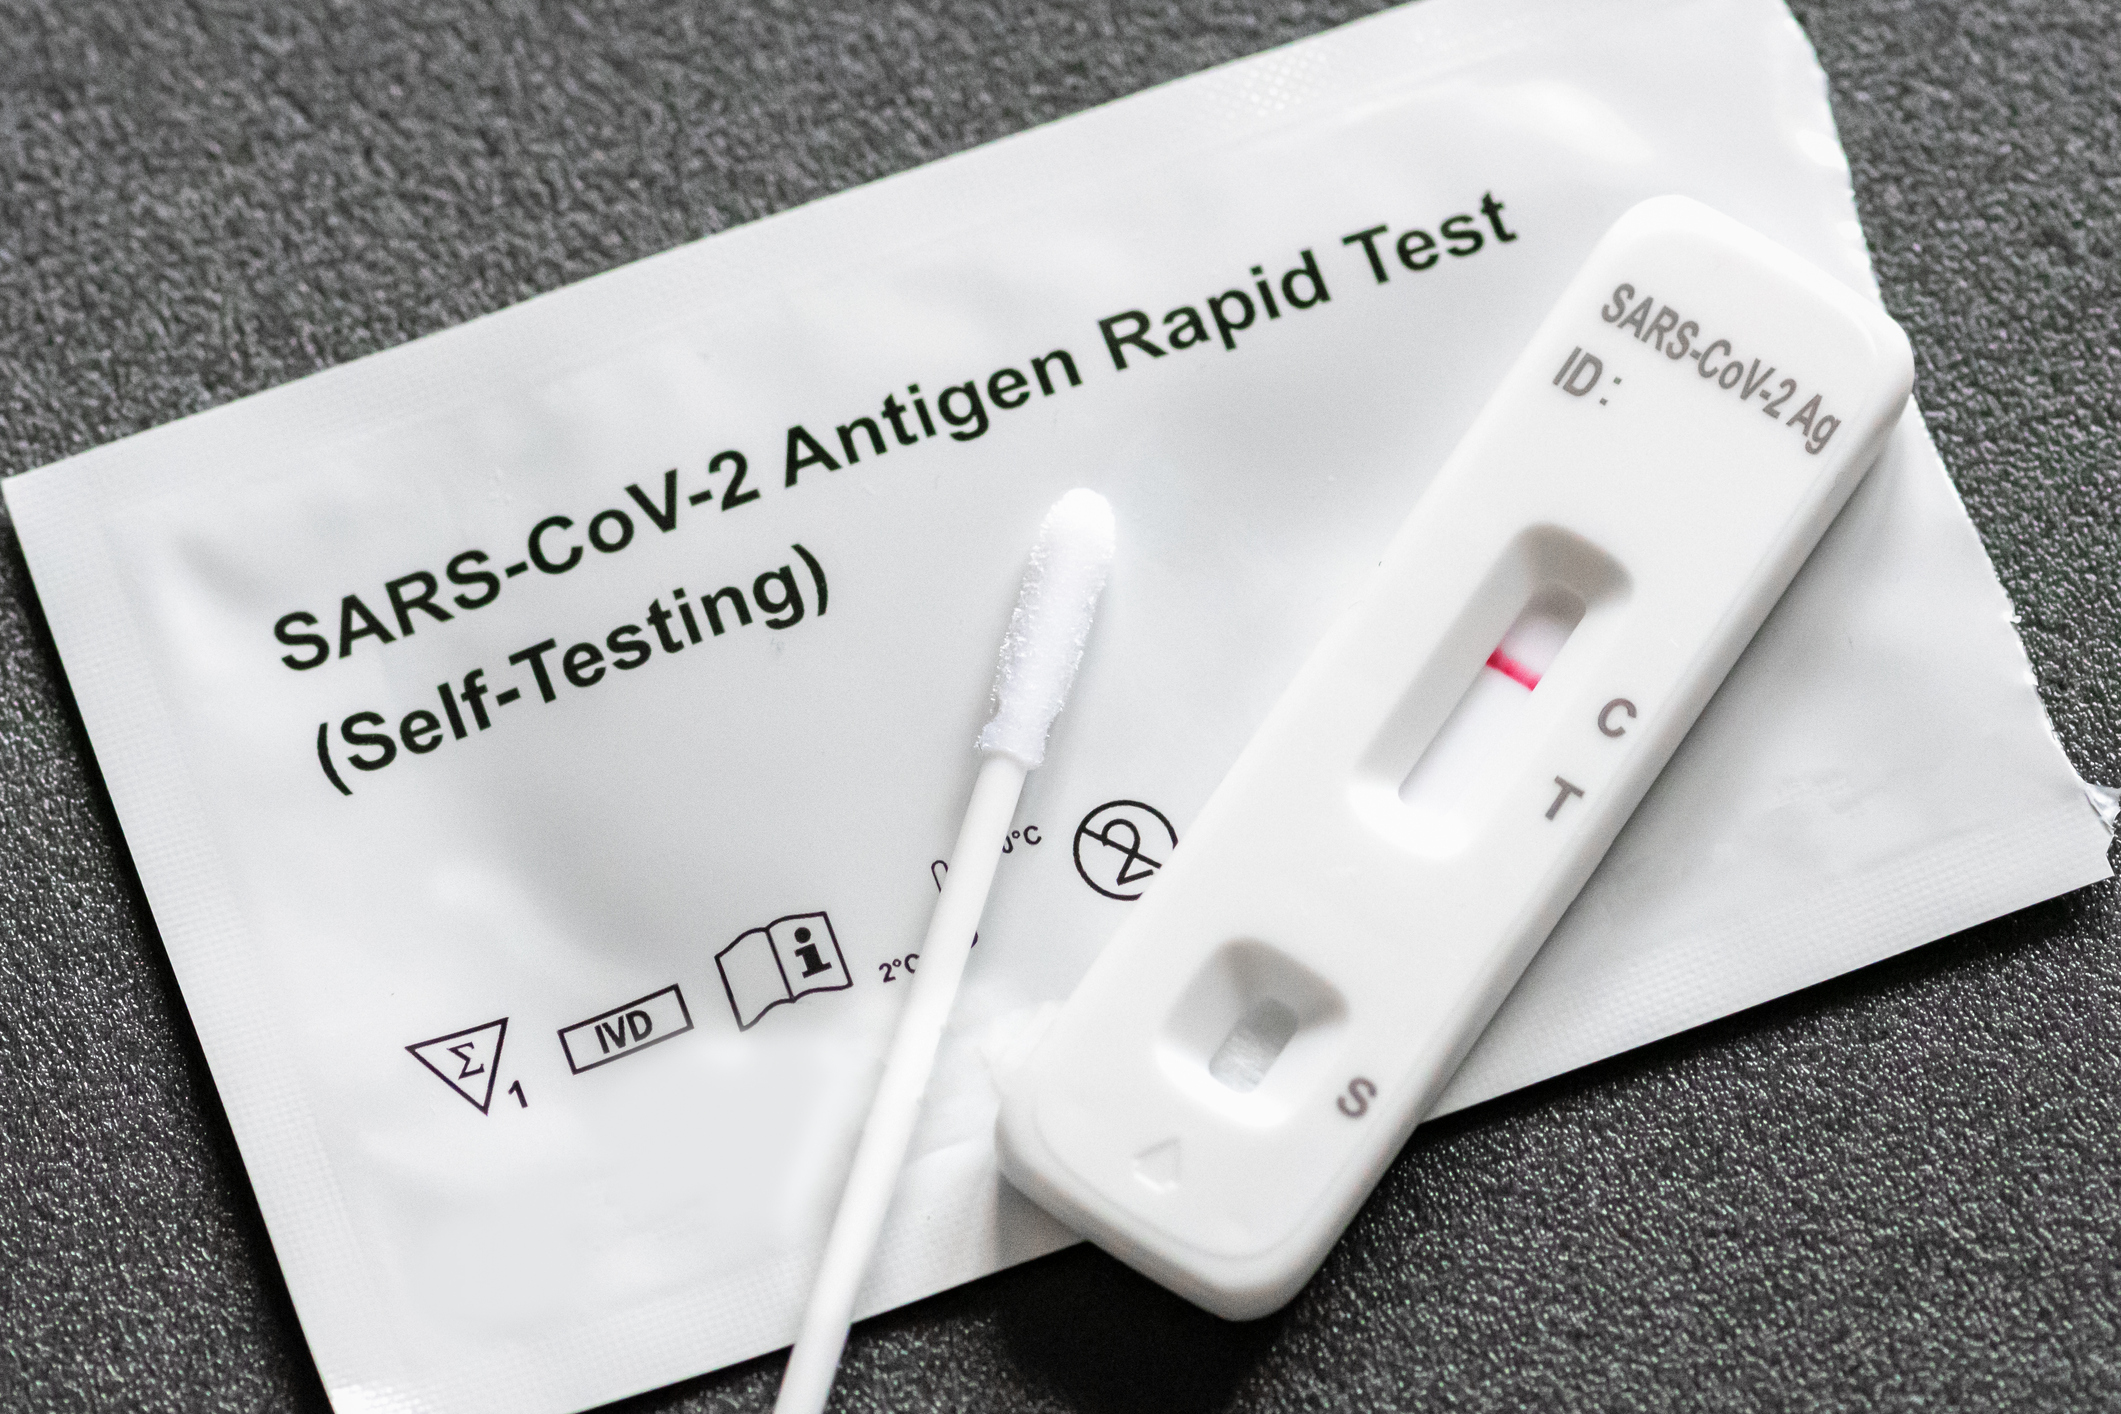 The World Health Organization has urged manufacturers to make Covid-19 testing kits more readily available and affordable